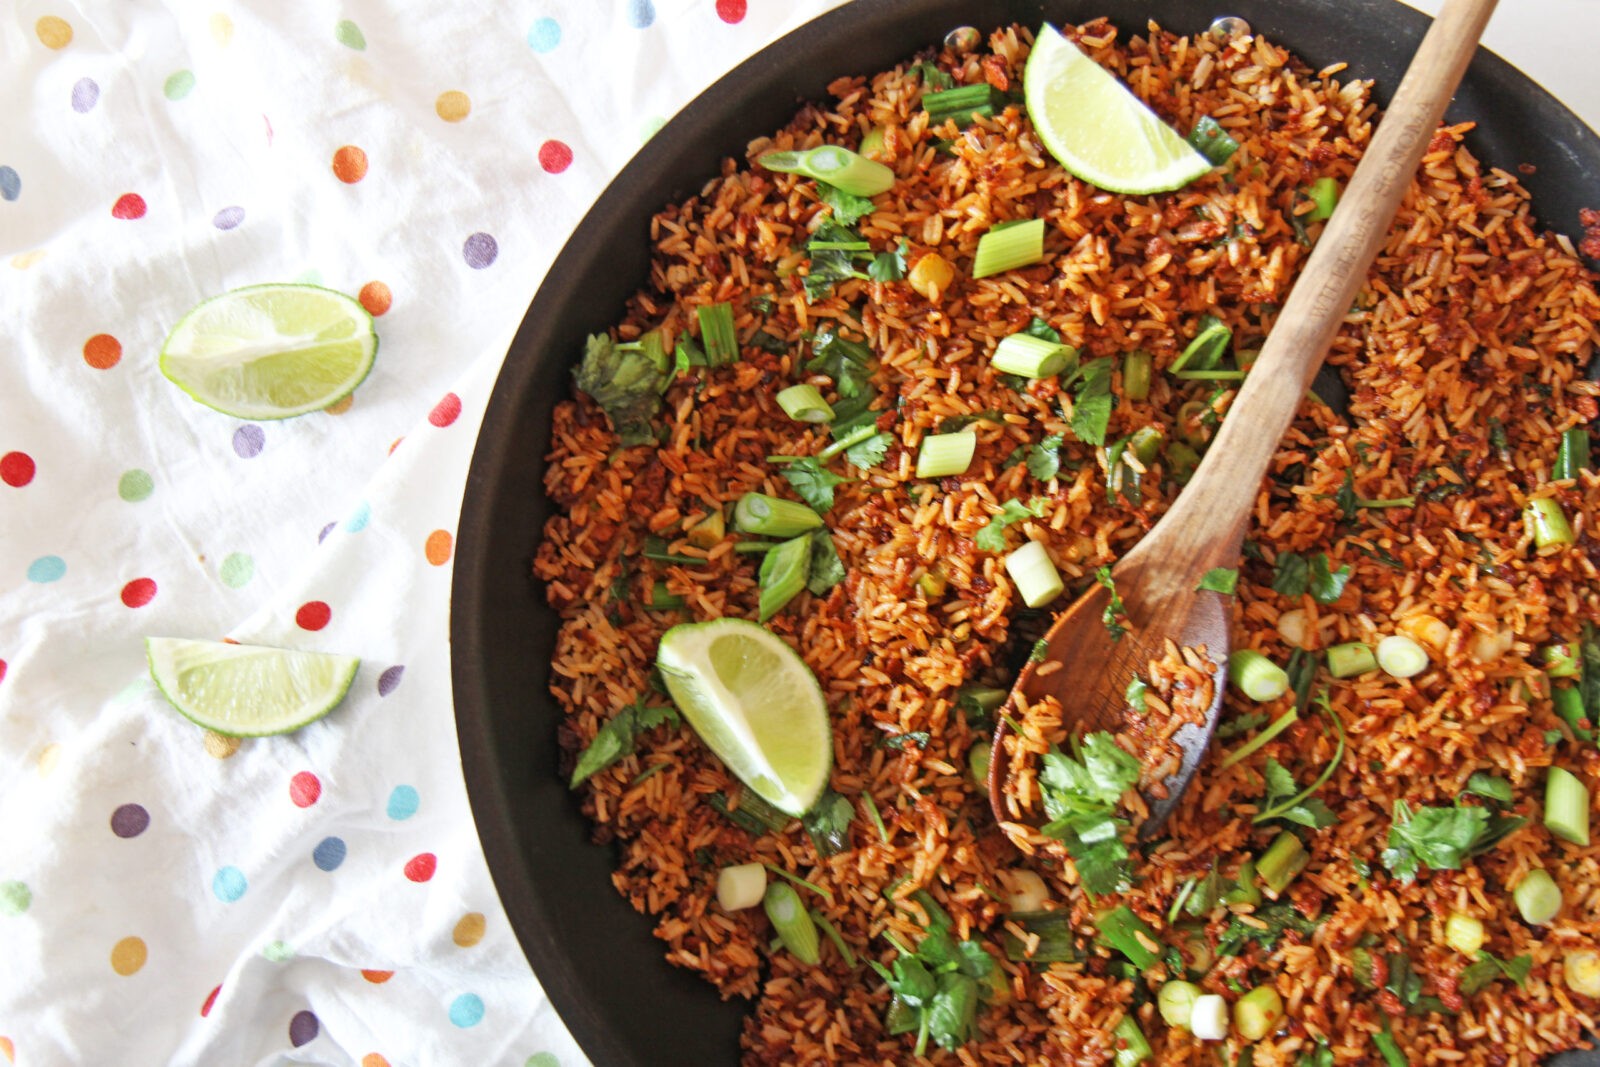 5 Ingredient Taco Fried Rice. Easy dinner for busy families. Rice, chorizo, scallions, cilantro, and lime. Also amazing leftovers. Happy Cooking! www.ChopHappy.com #friedrice #taco